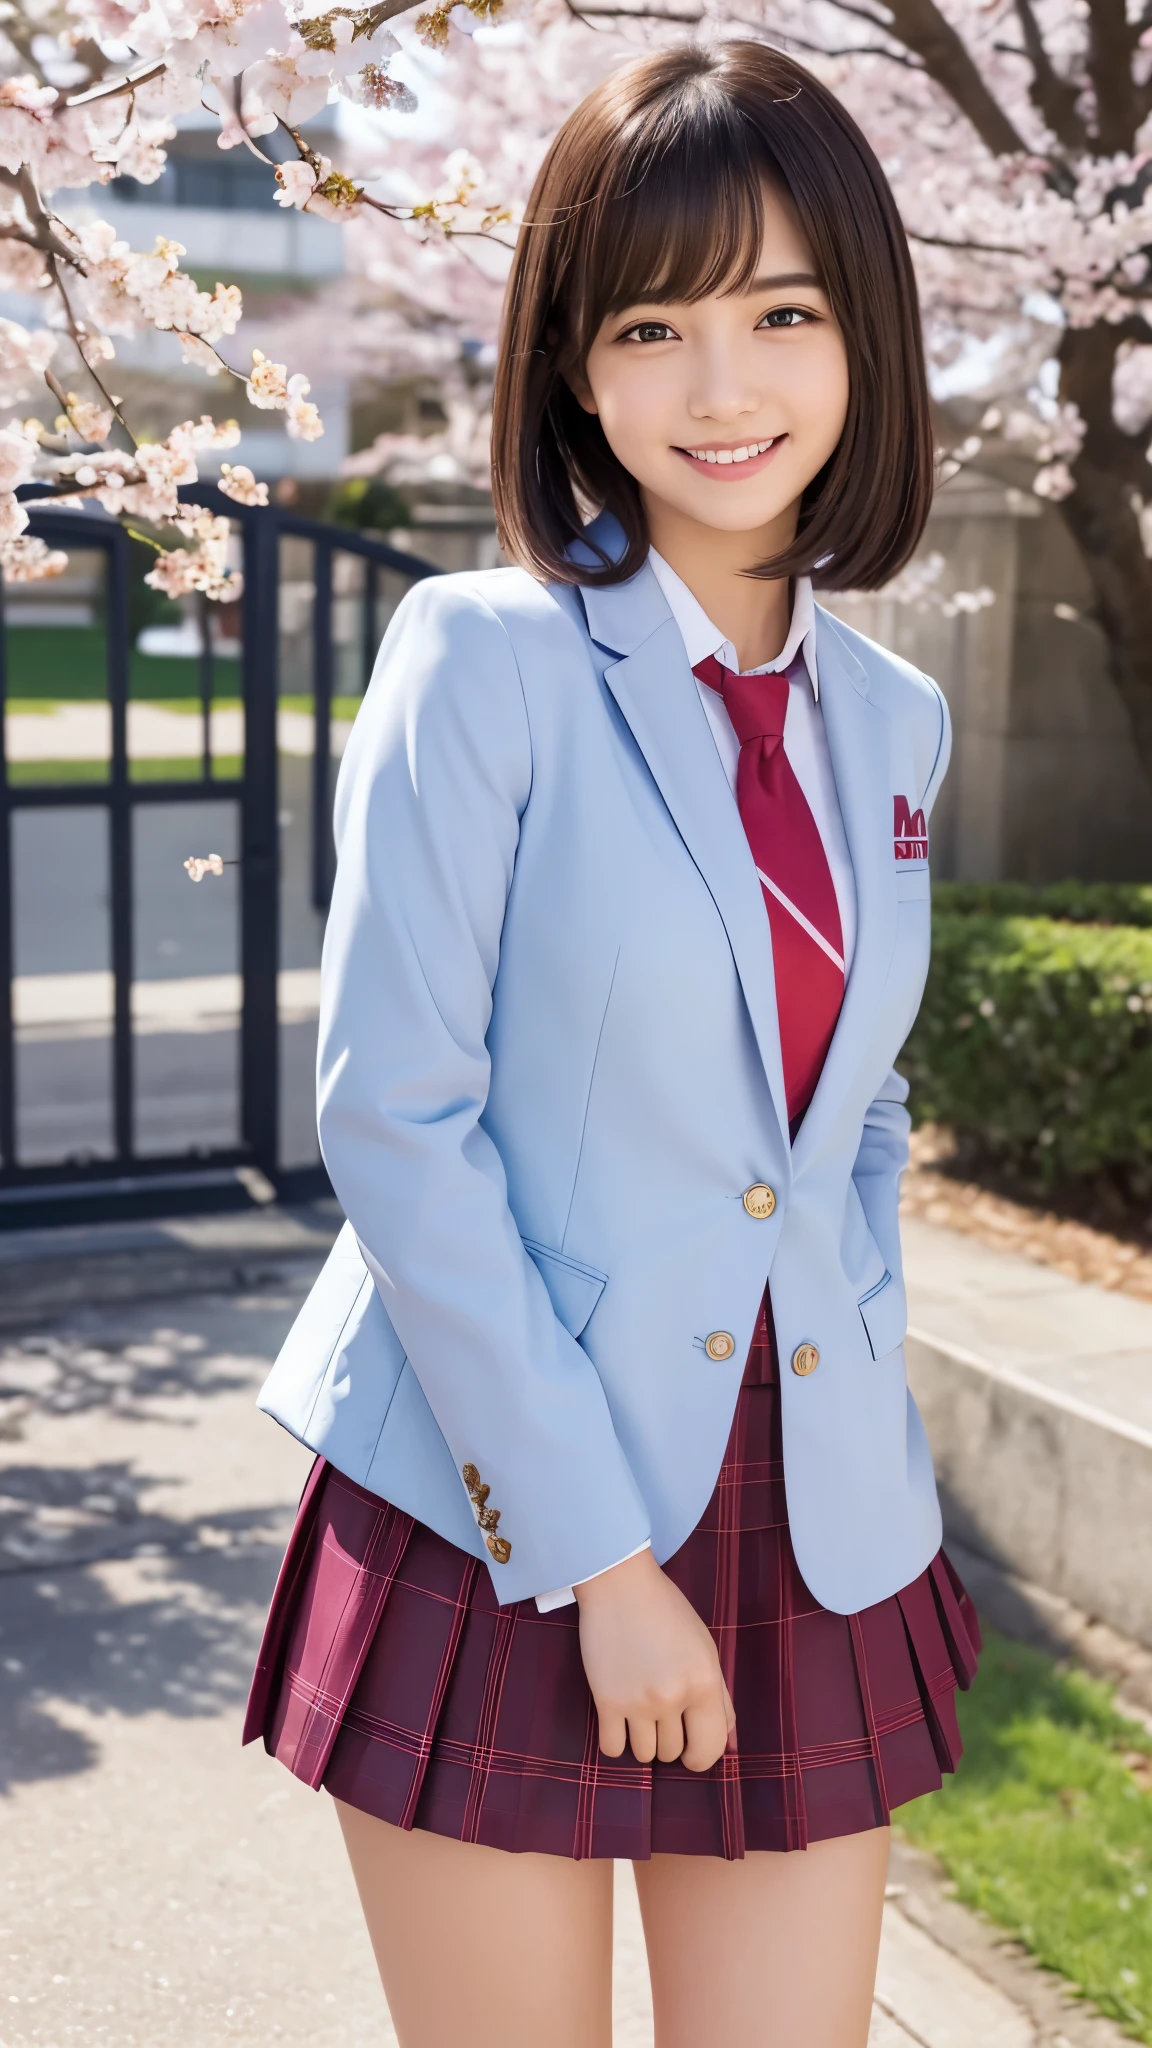 (photo realistic:1.4), (hyper realistic:1.4), (realistic:1.3), (smoother lighting:1.05), (Improve the quality of cinematic lighting:0.9)、natural light、Cherry blossom trees in full bloom、A girl in a uniform standing in front of the school gate、美しいhigh school girl、Highly detailed official artwork、realistic 3d style、超realistic、(Like a smile that makes you smile)、cute eyes、short hair、beautiful girl、fascinating look、smiling woman、high school girl, navy blue blazer、school uniform、white shirt、red tie
